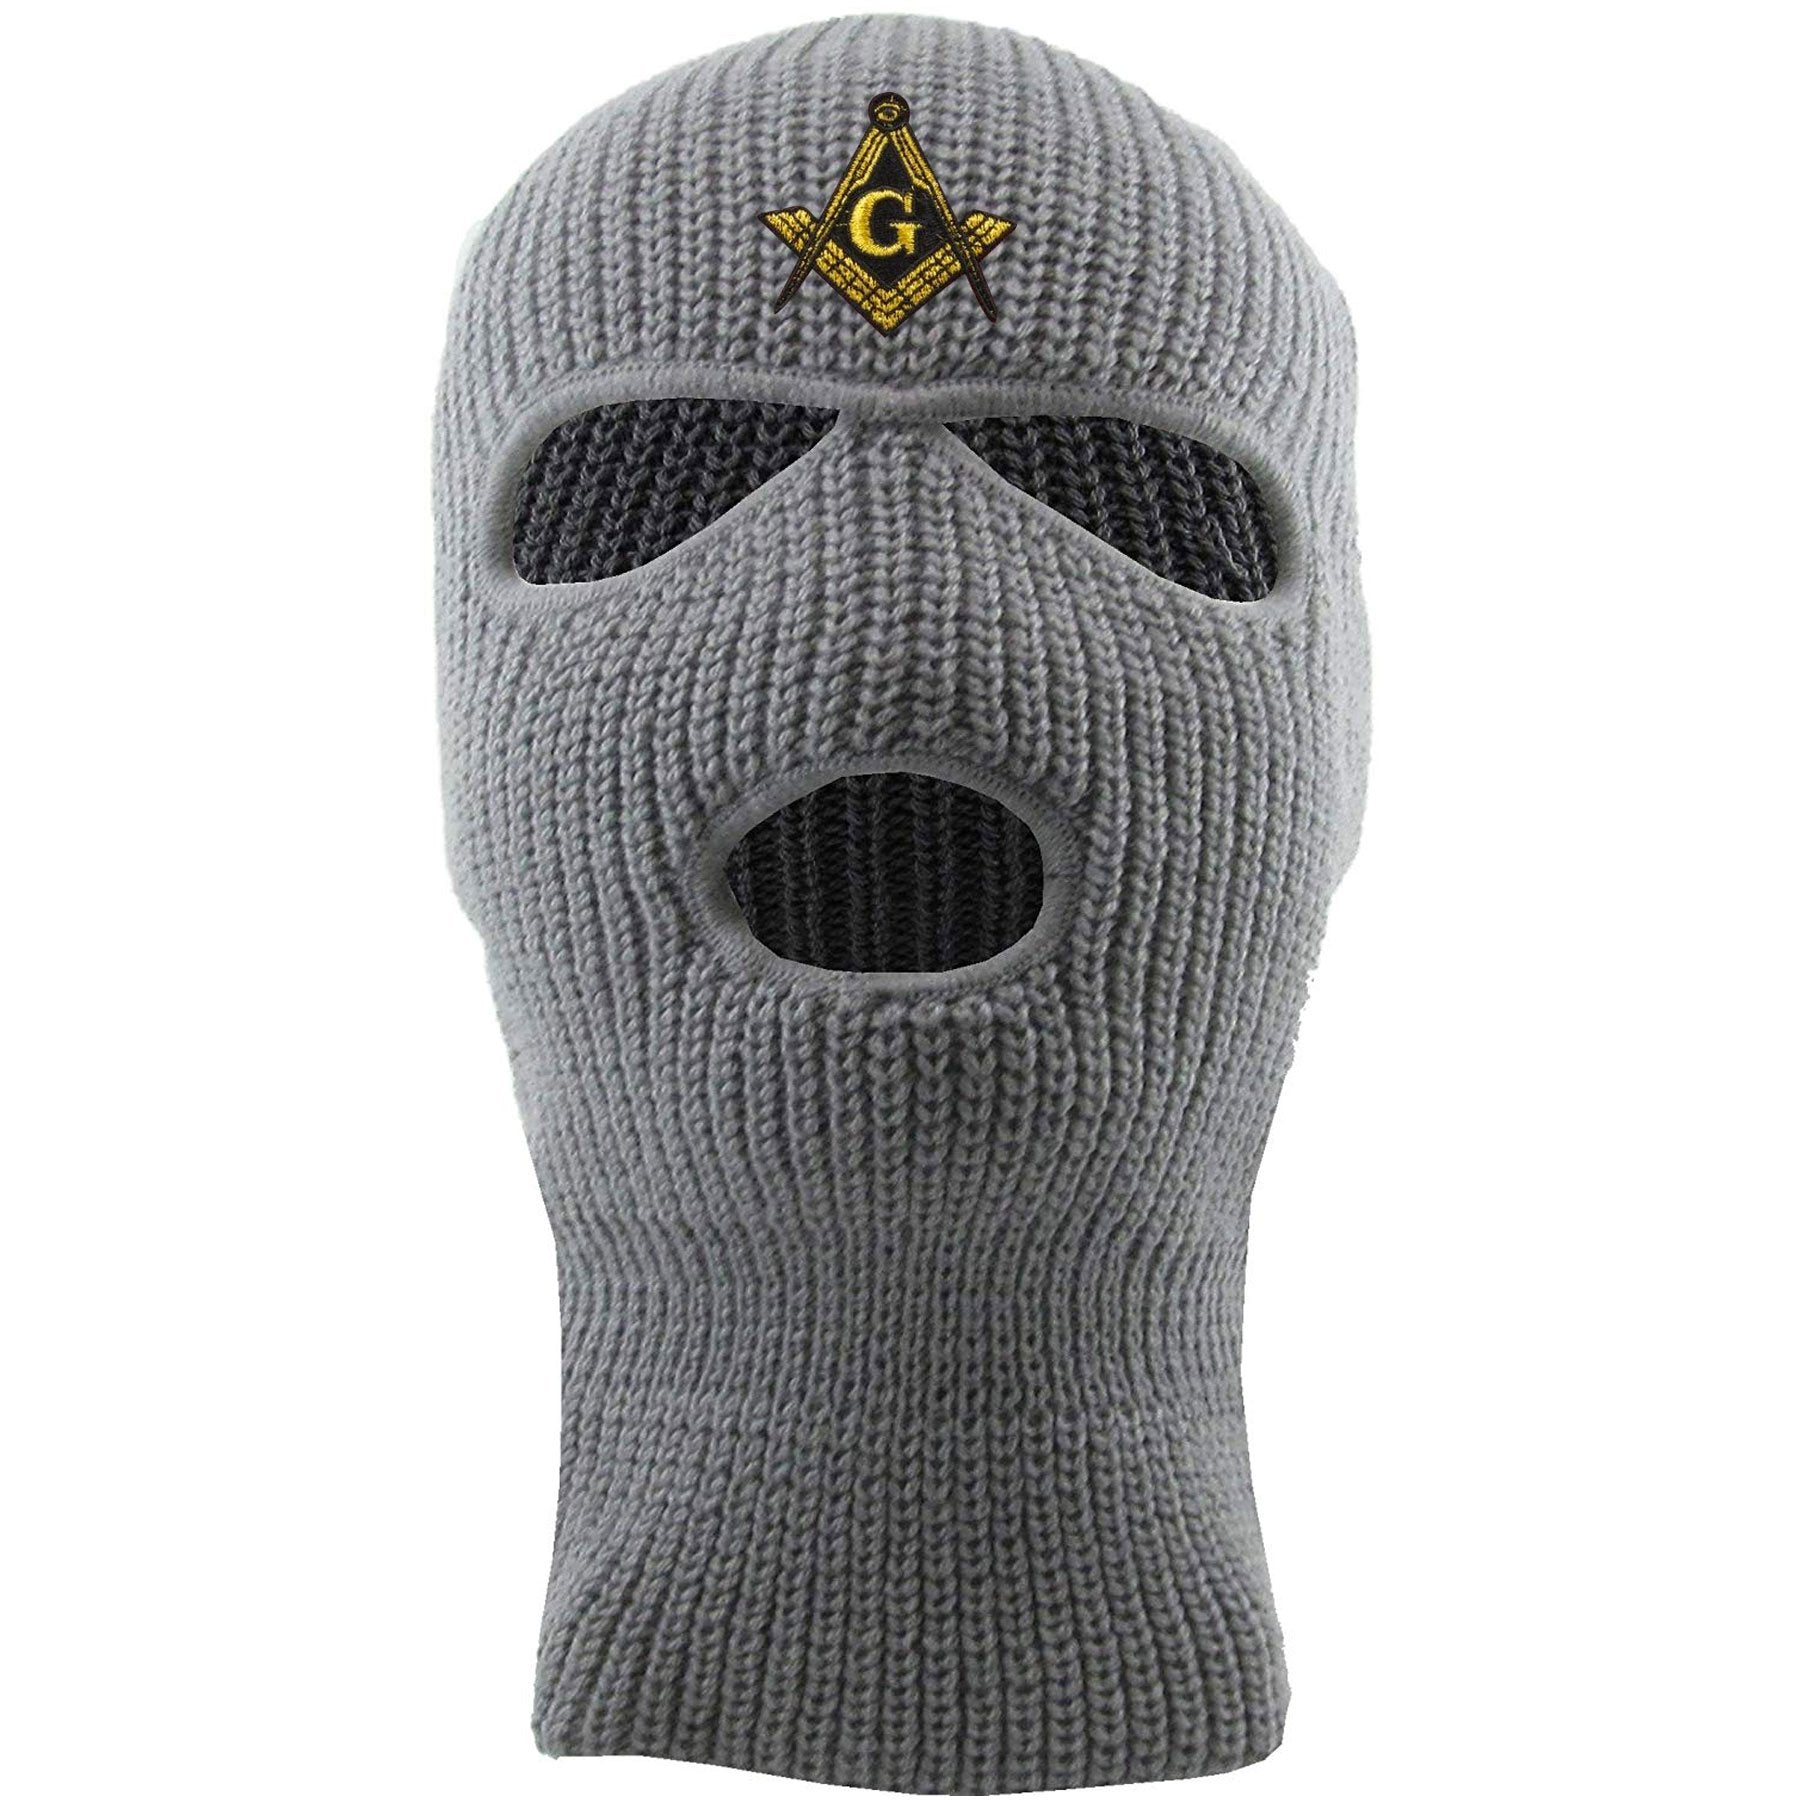 Embroidered on the front of the light gray masonic ski mask is the free mason square compass embroidered in metallic gold and black